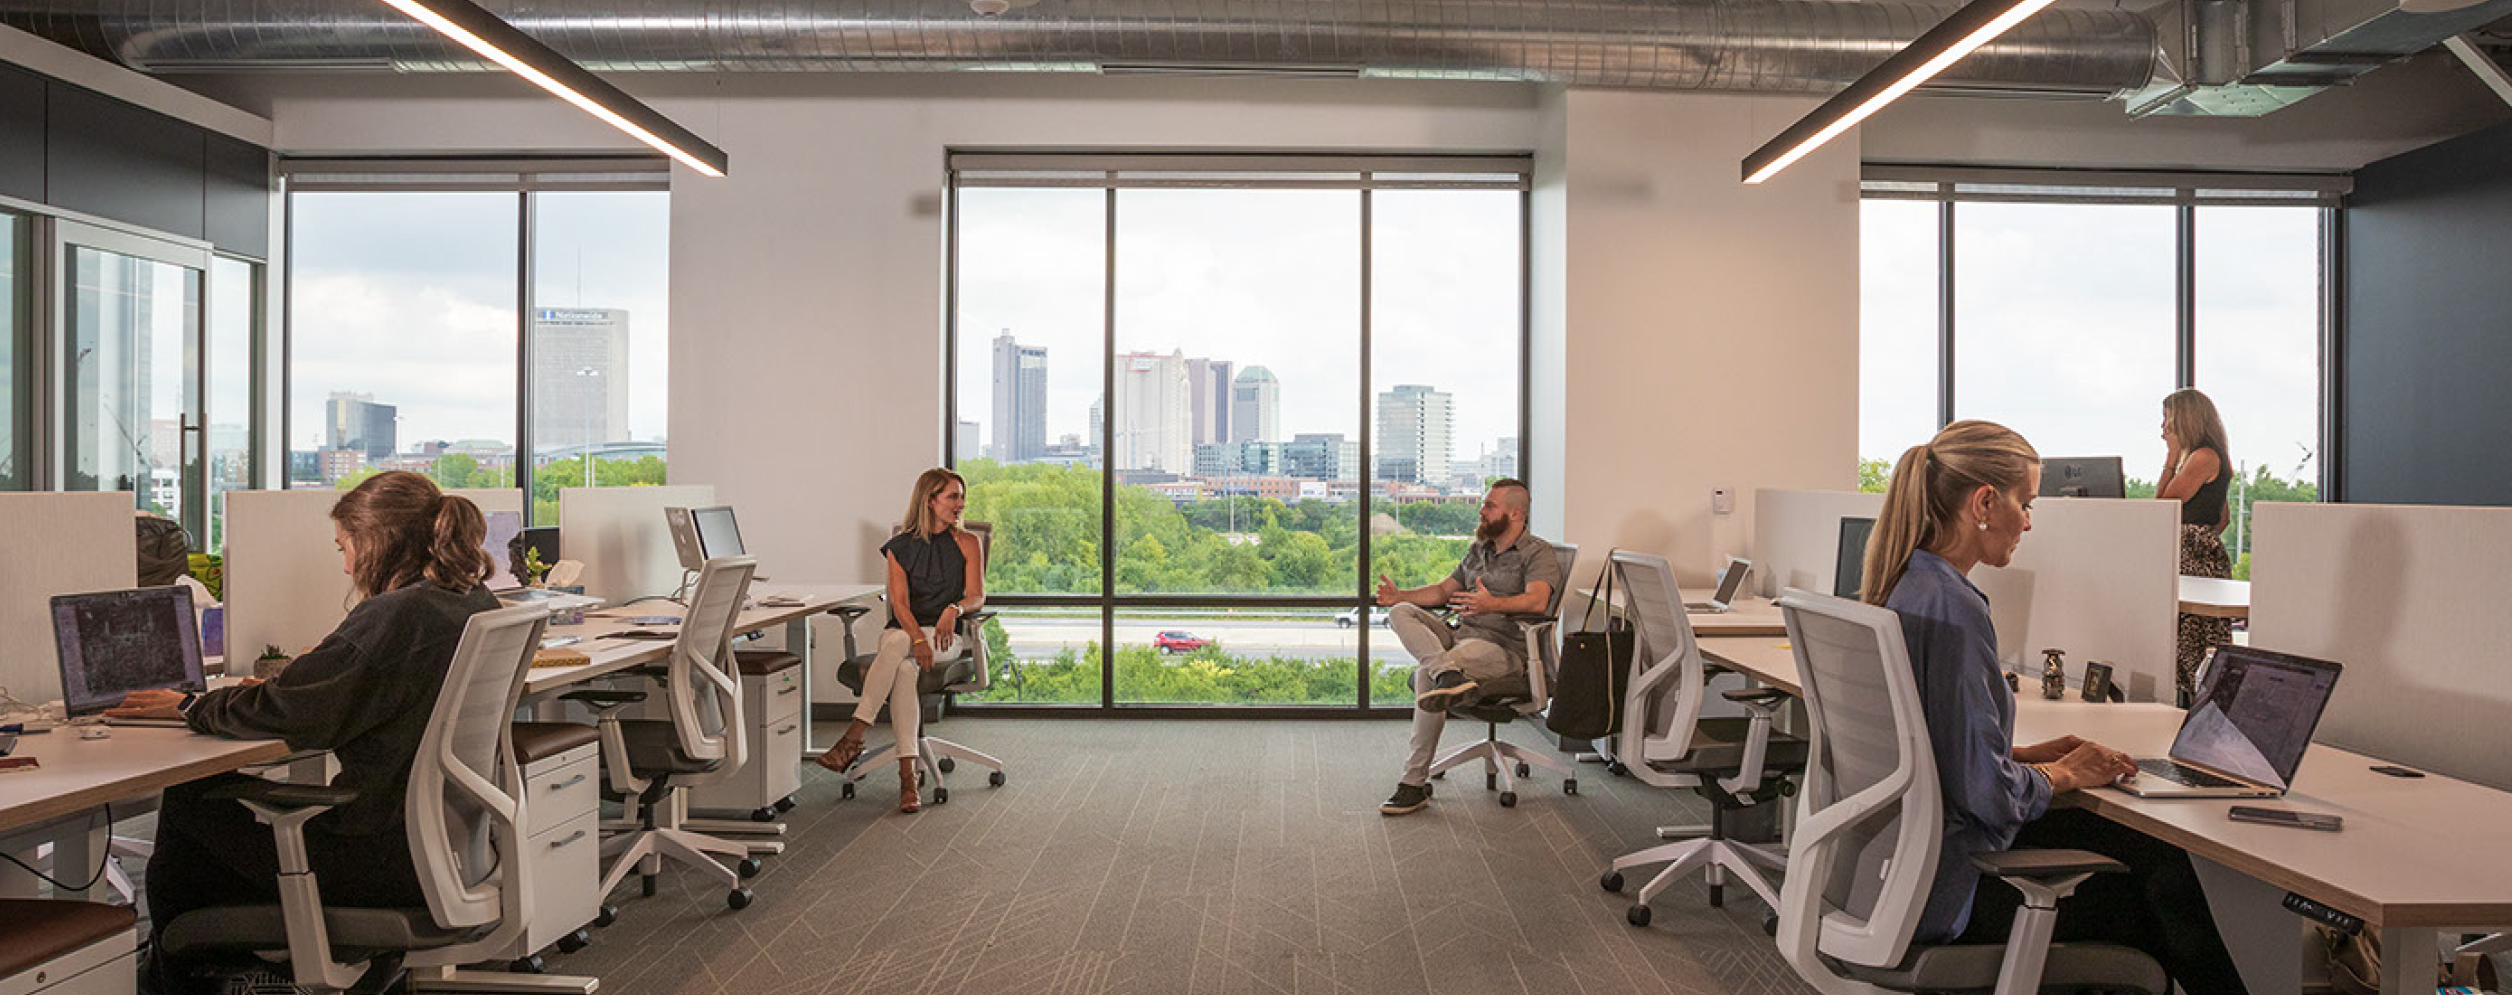 Upright team members working in the office overlooking downtown Columbus.